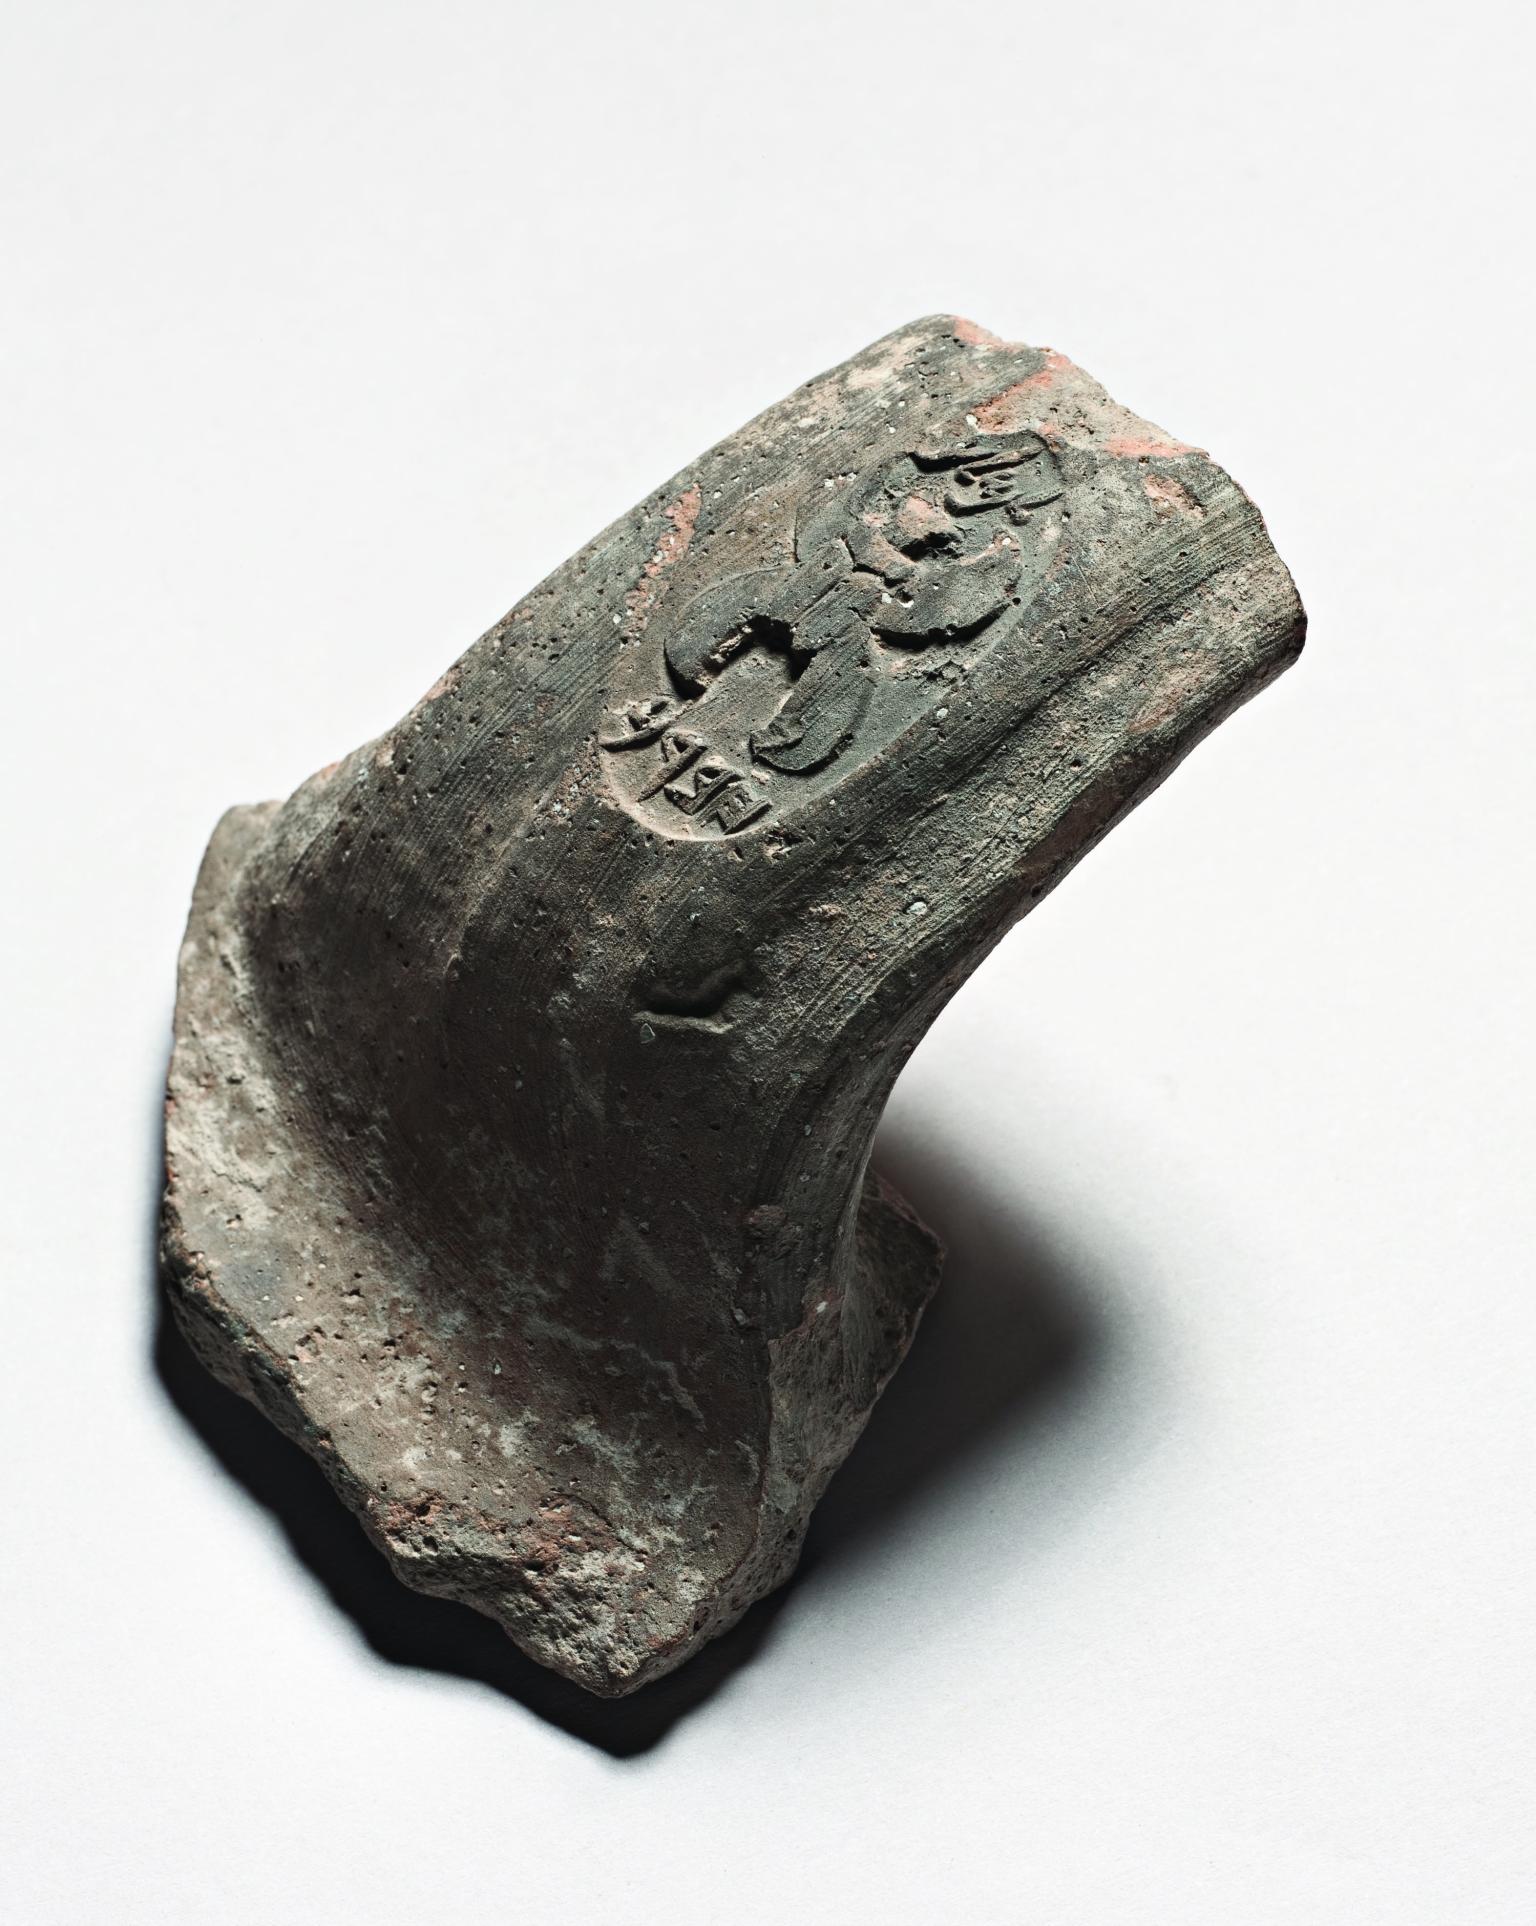 Ceramic handle with impression of large four-winged scarab beetle.